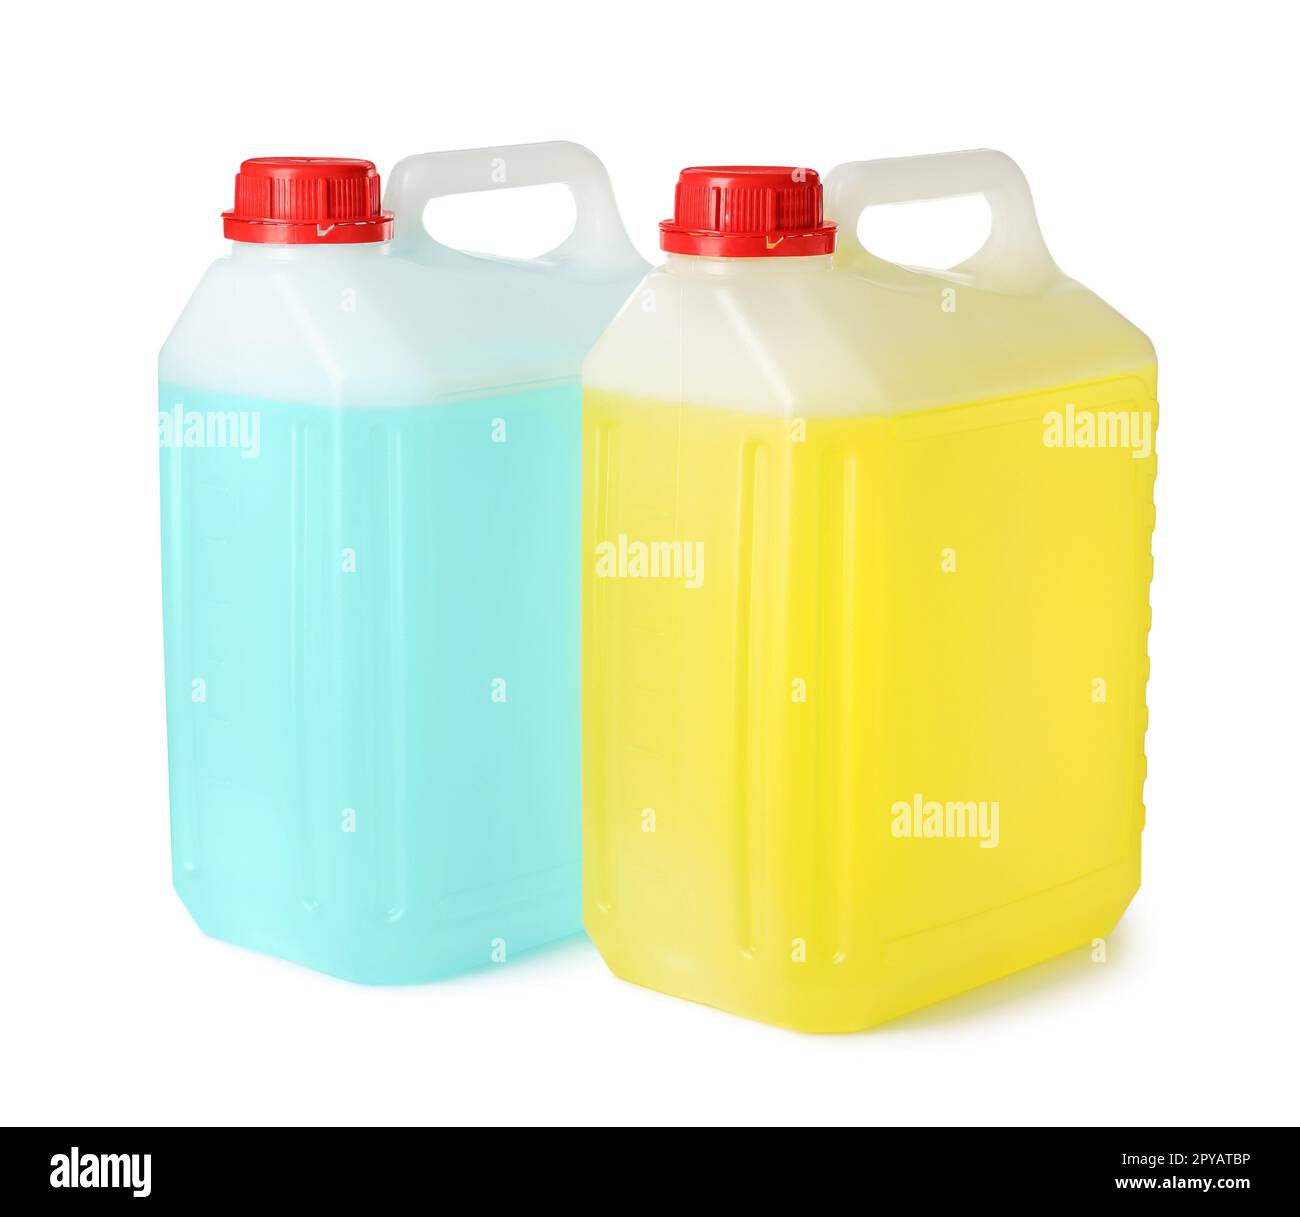 Plastic canisters with liquids on white background Stock Photo